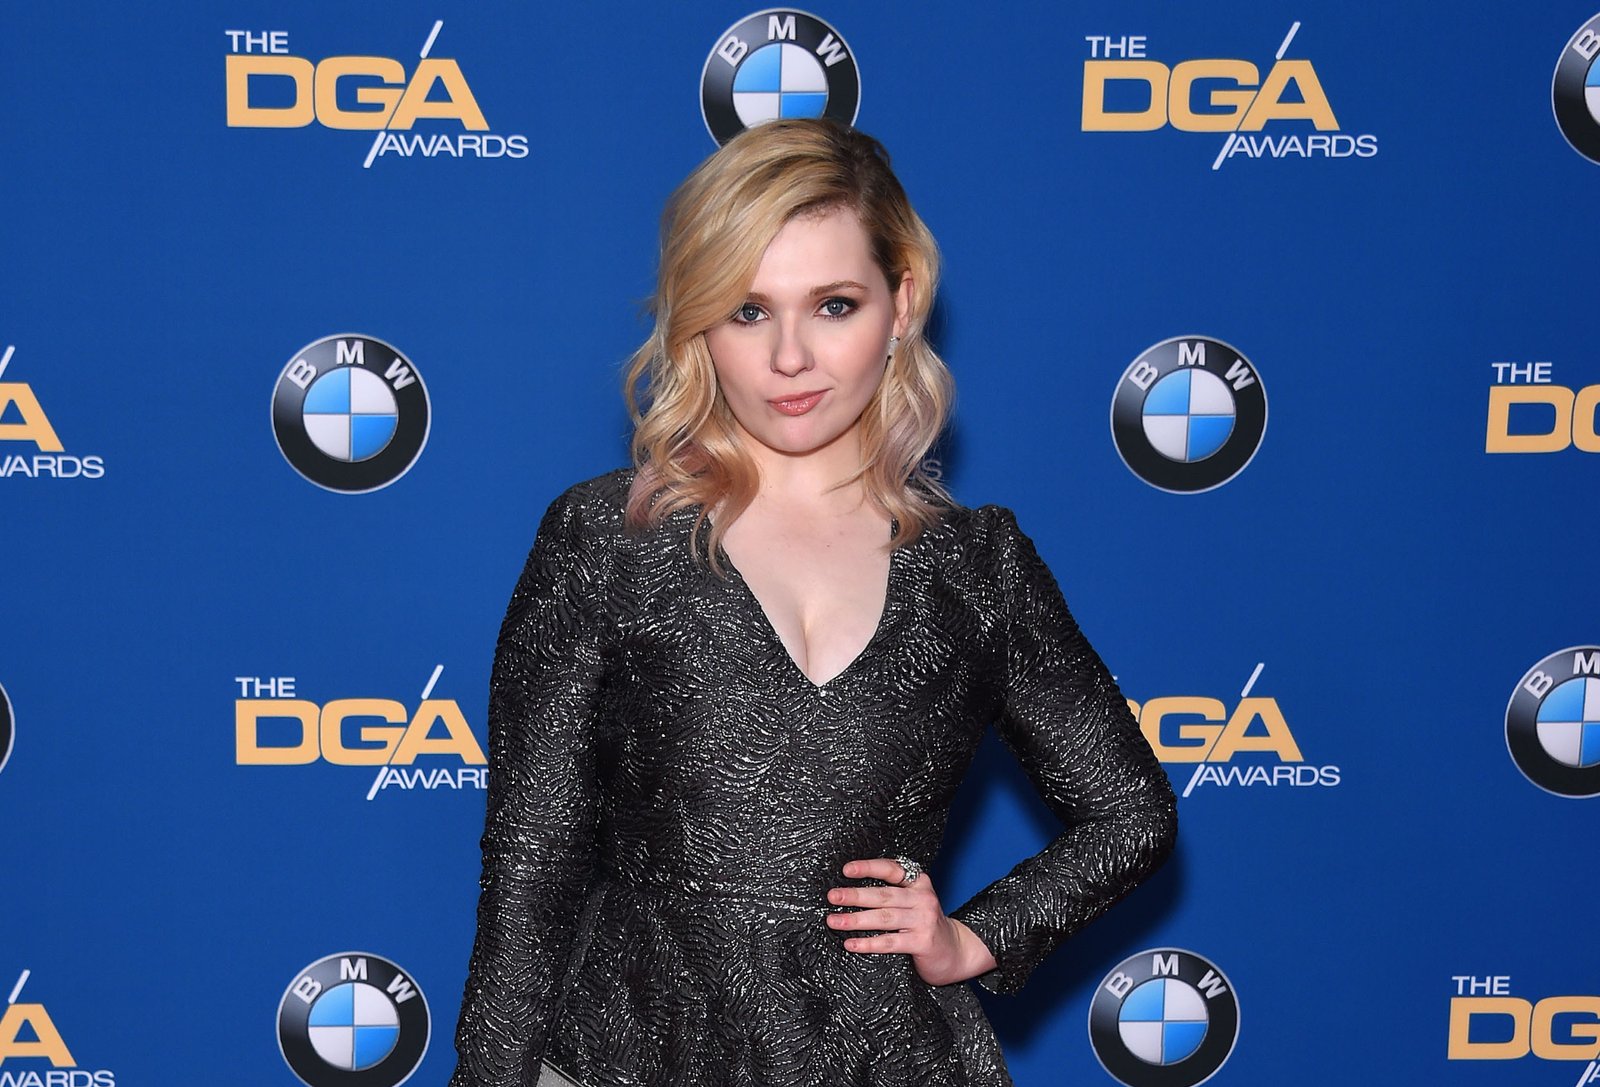 Abigail Breslin's Height, Weight, Age, Measurements & More